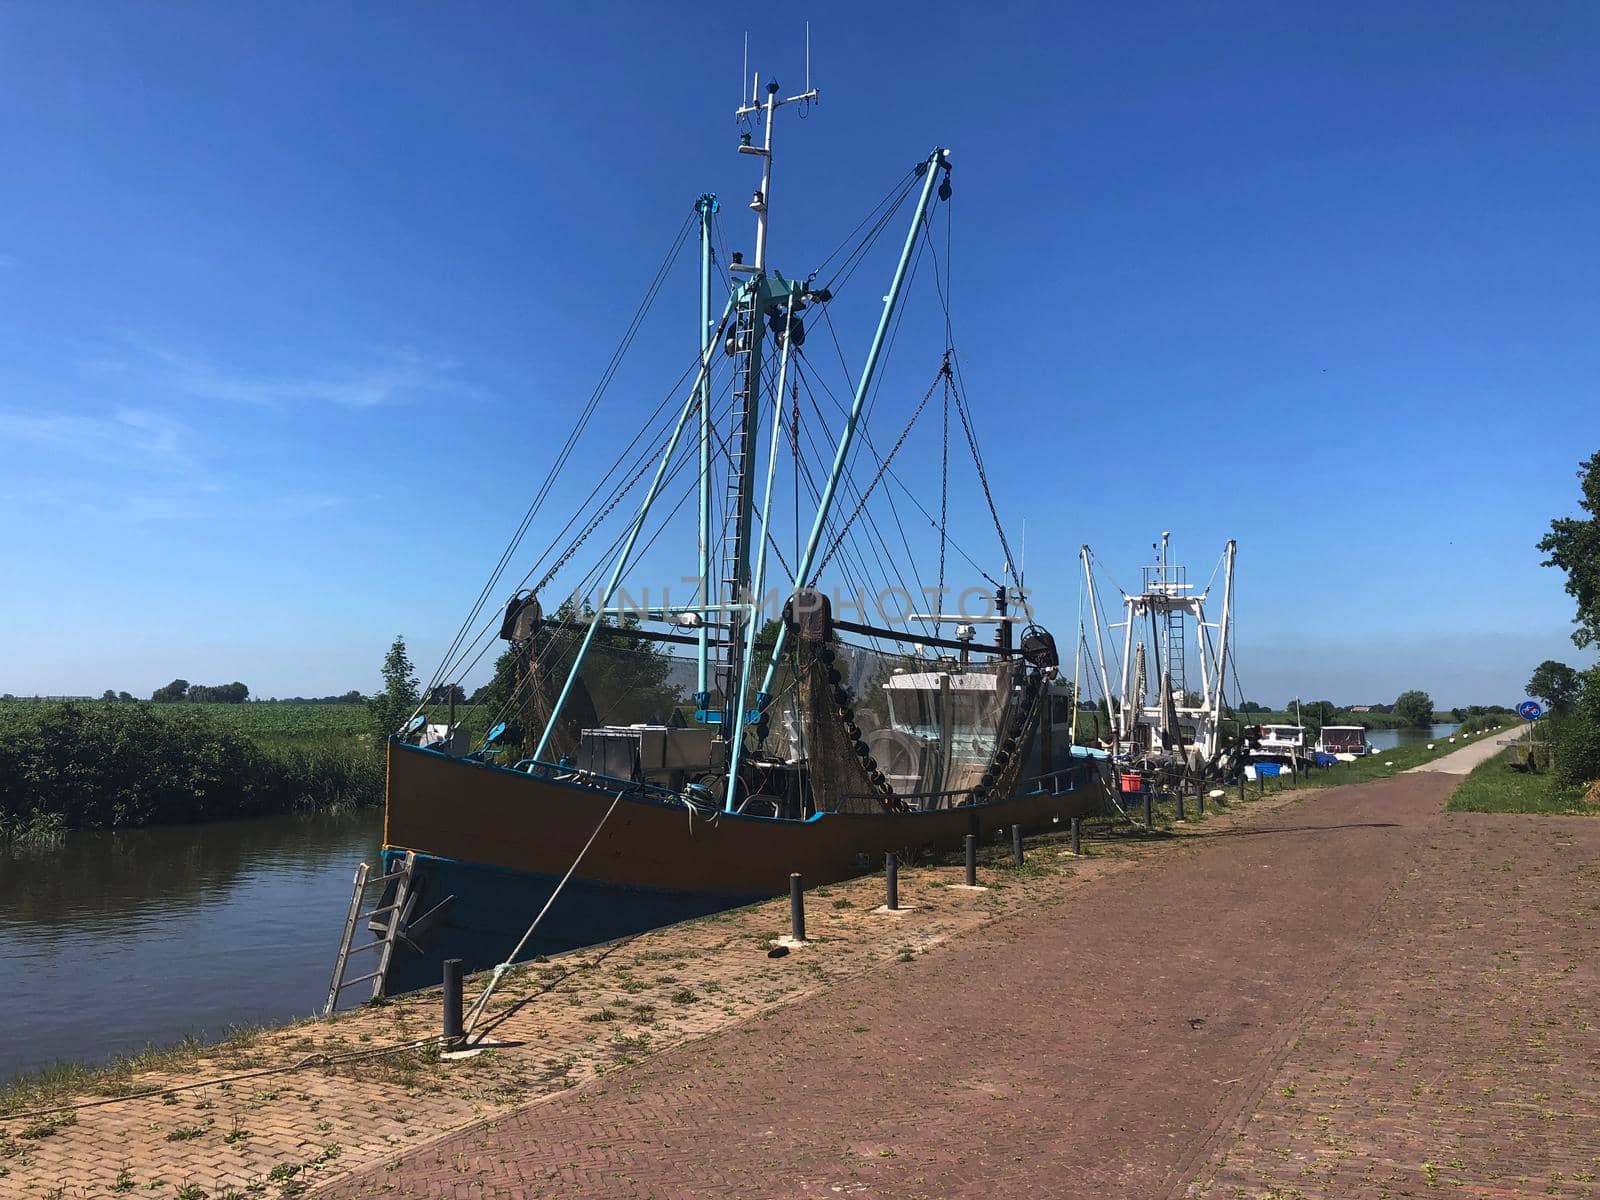 Fishing boats at a canal around Engwierum, Friesland, The Netherlands